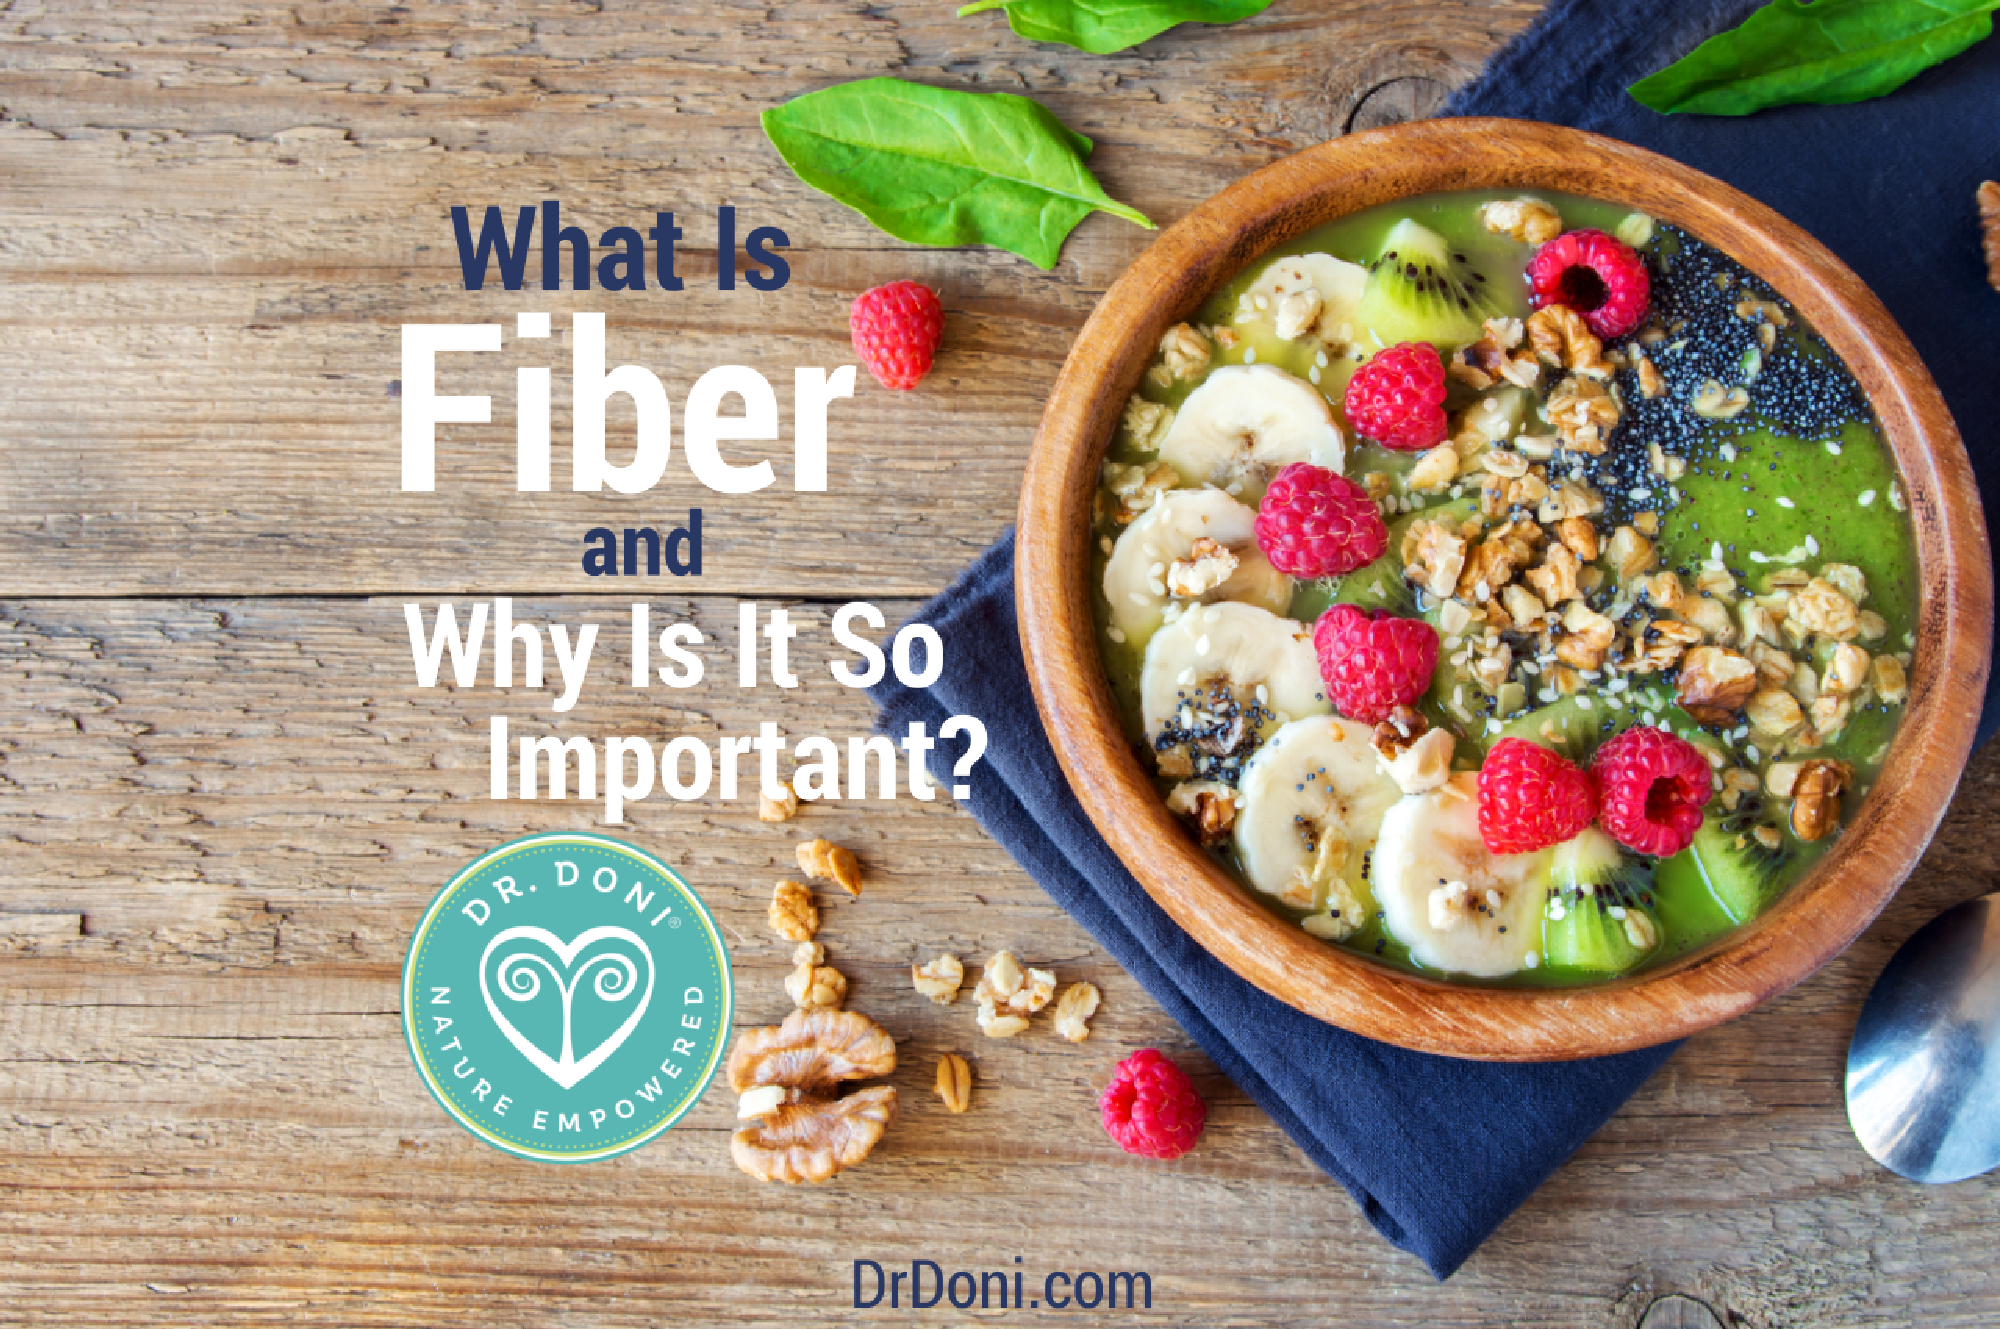 What Is Fiber and Why Is It So Important?